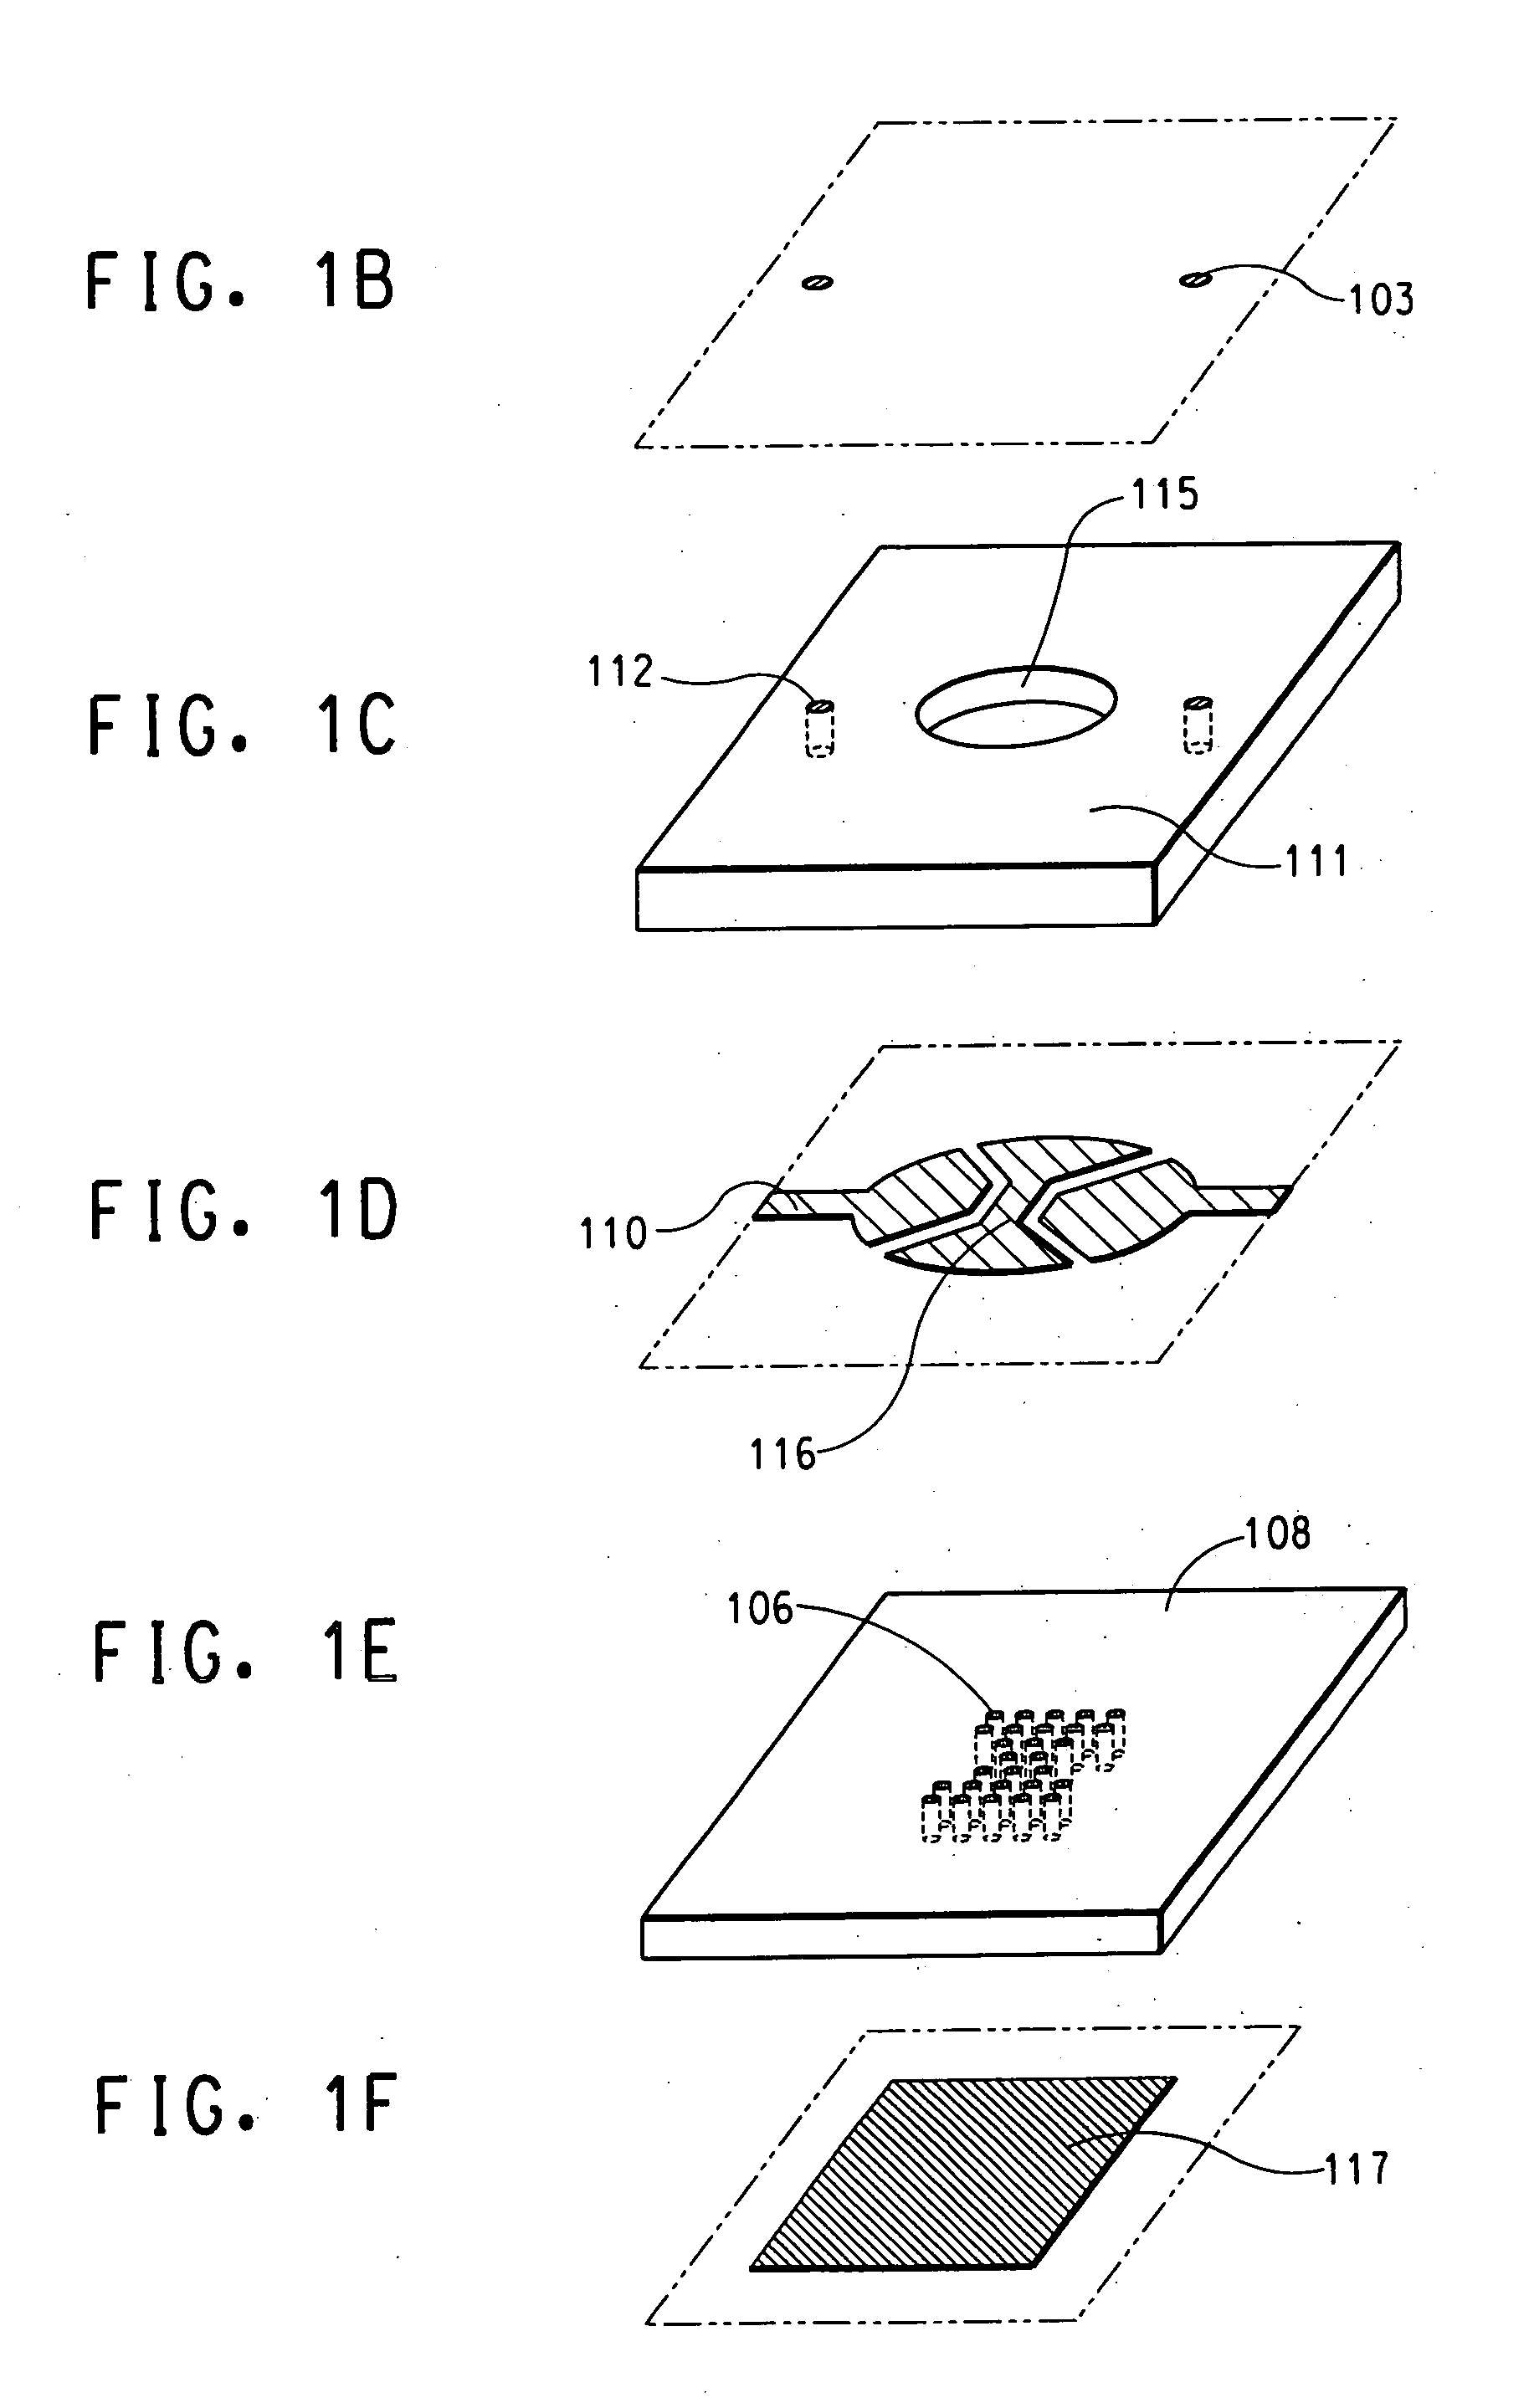 Low temperature co-fired ceramic (LTCC) tape compositions, light emitting diode (LED) modules, lighting devices and method of forming thereof